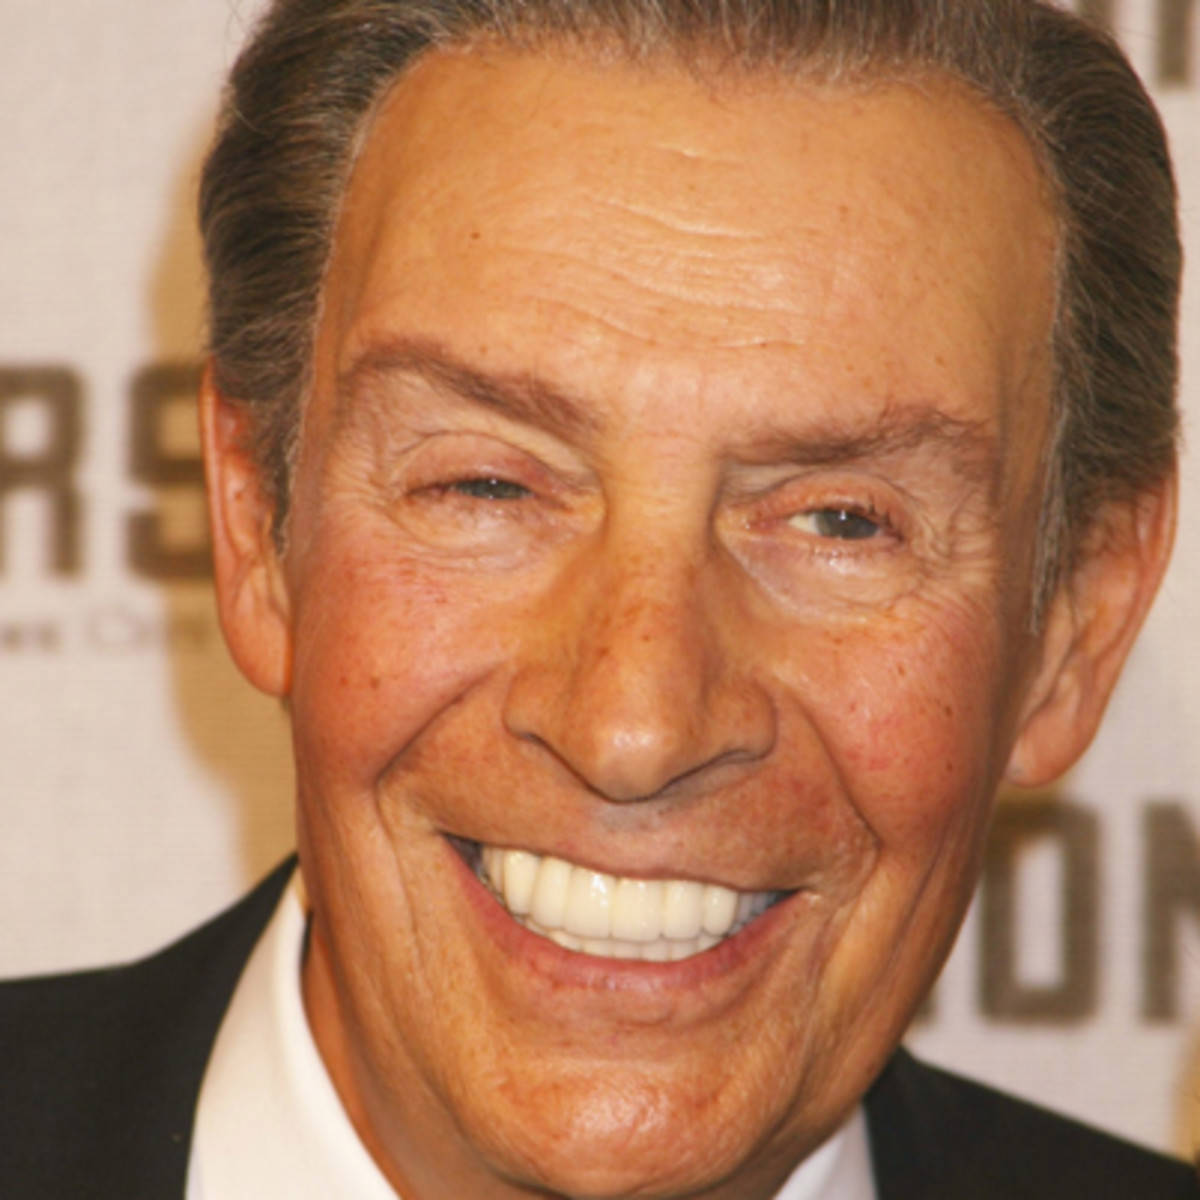 Legendary Actor Jerry Orbach at the Directors Guild of America Awards. Wallpaper